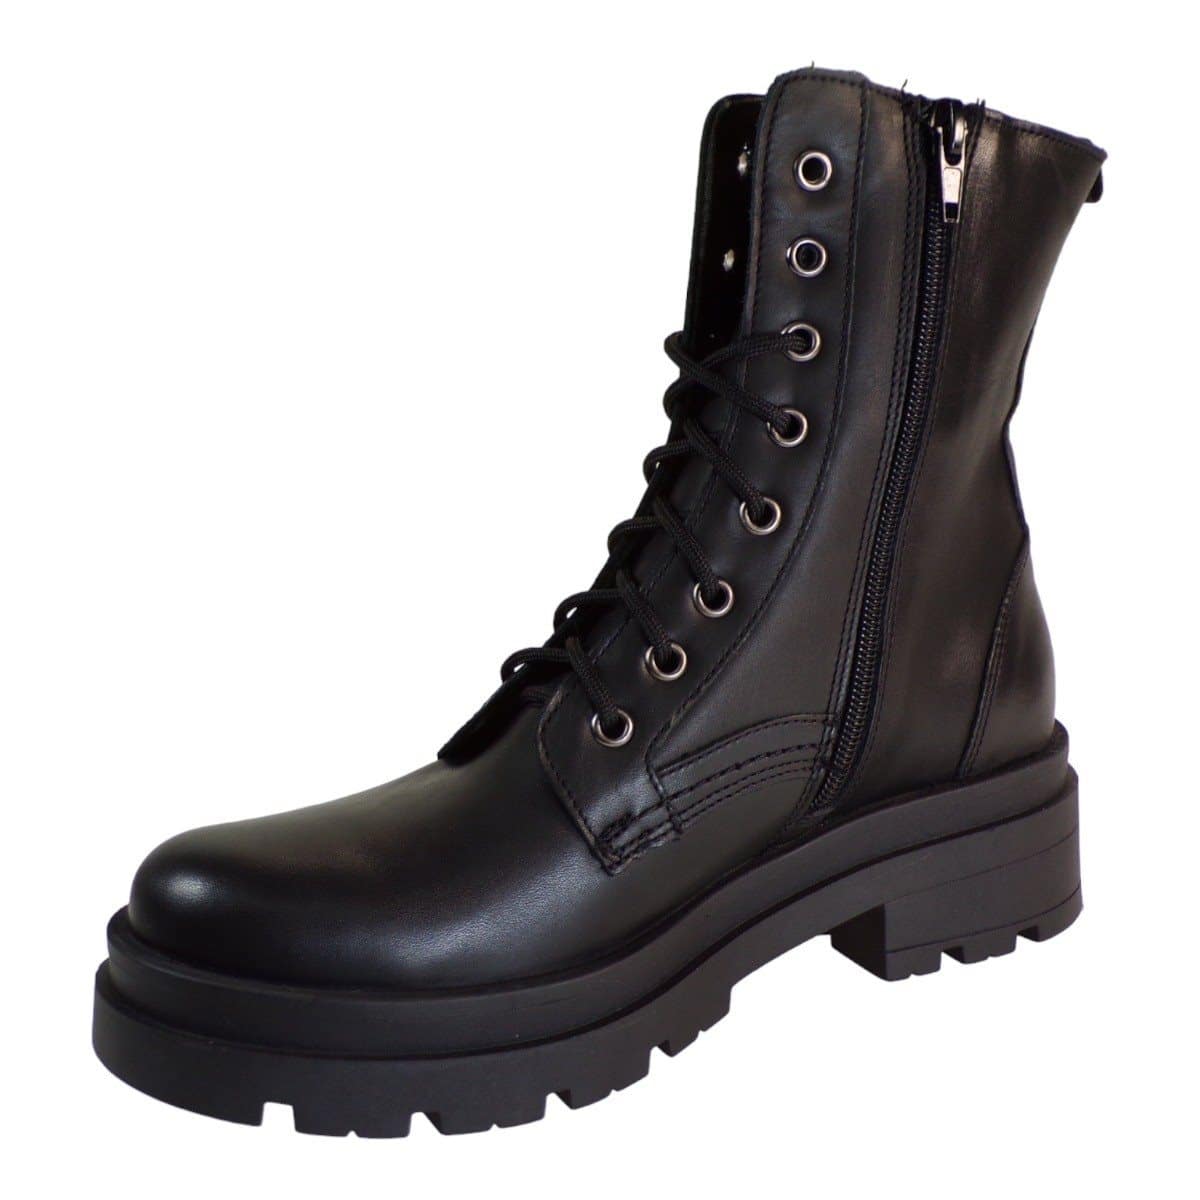 LEATHER ARMY BOOTS 5797-721 COMMANCHERO BLACK